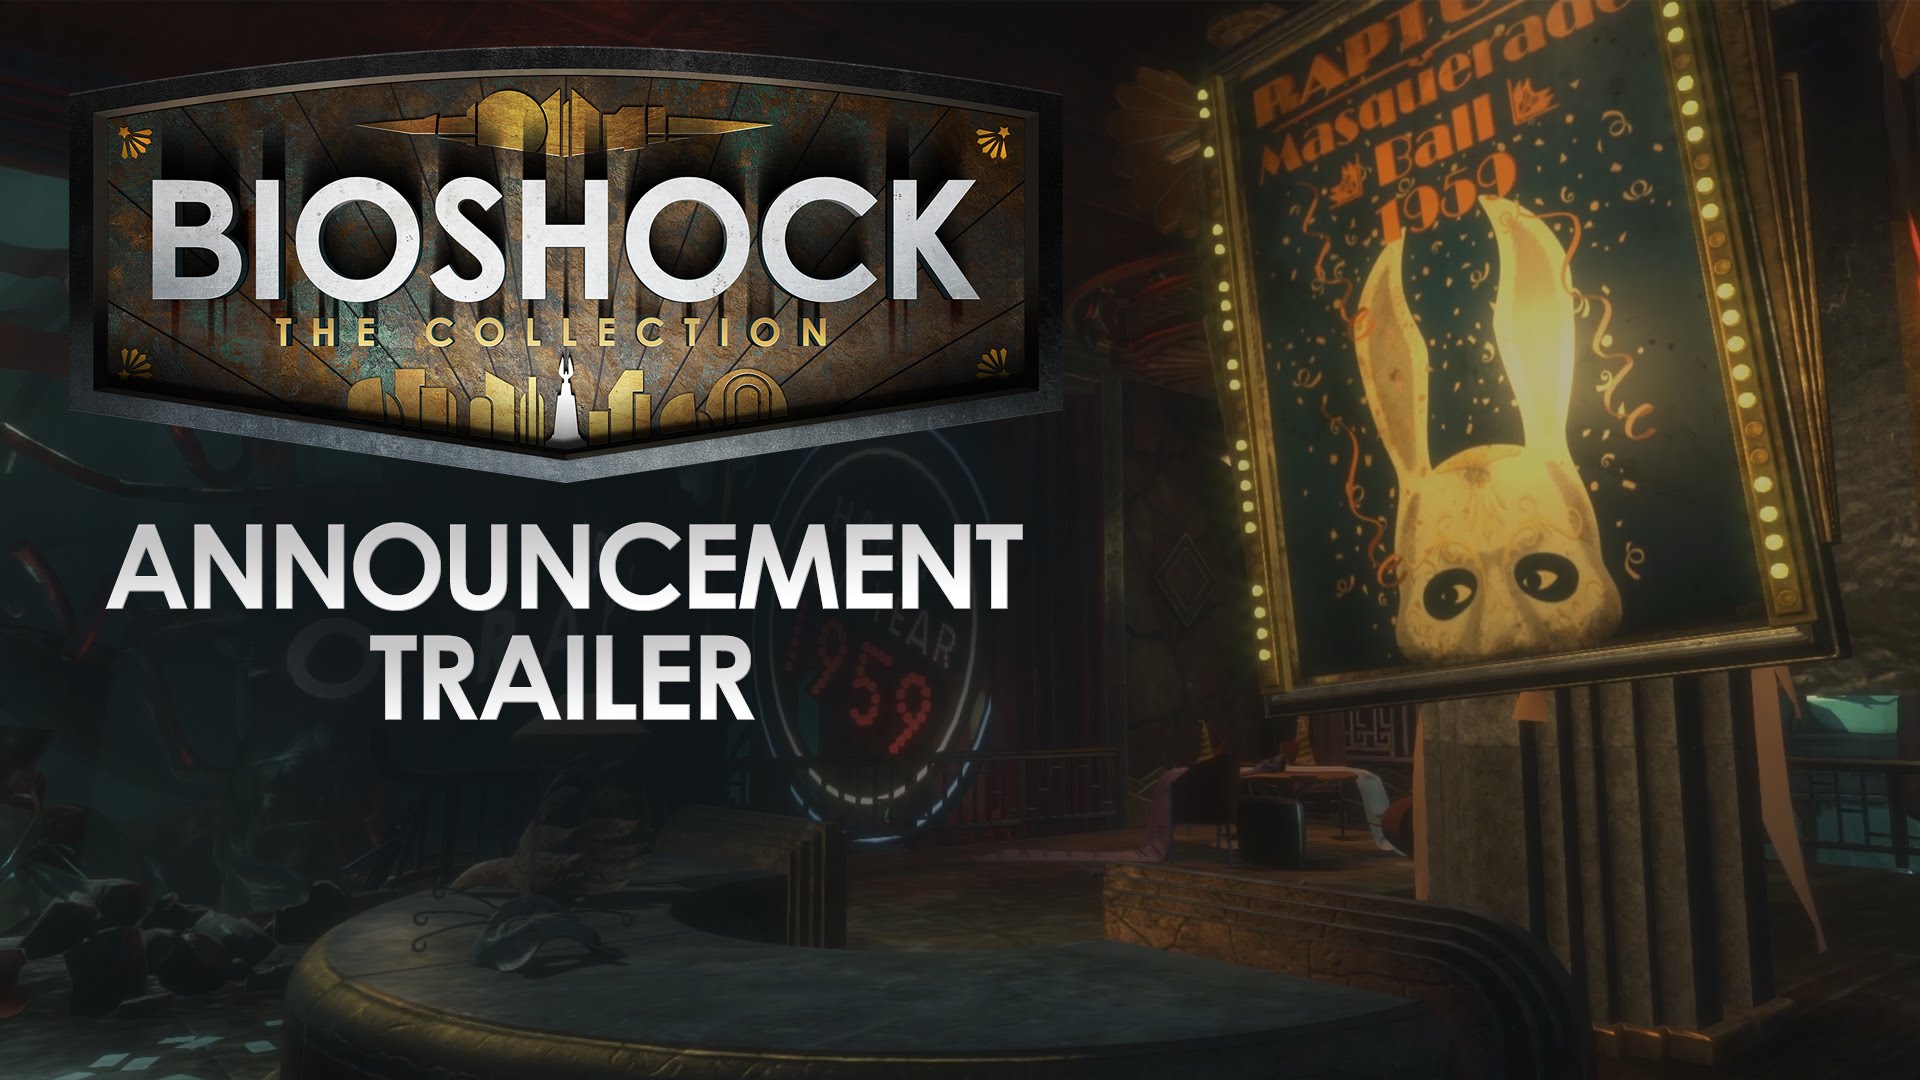 BioShock The Collection - Announcement Trailer